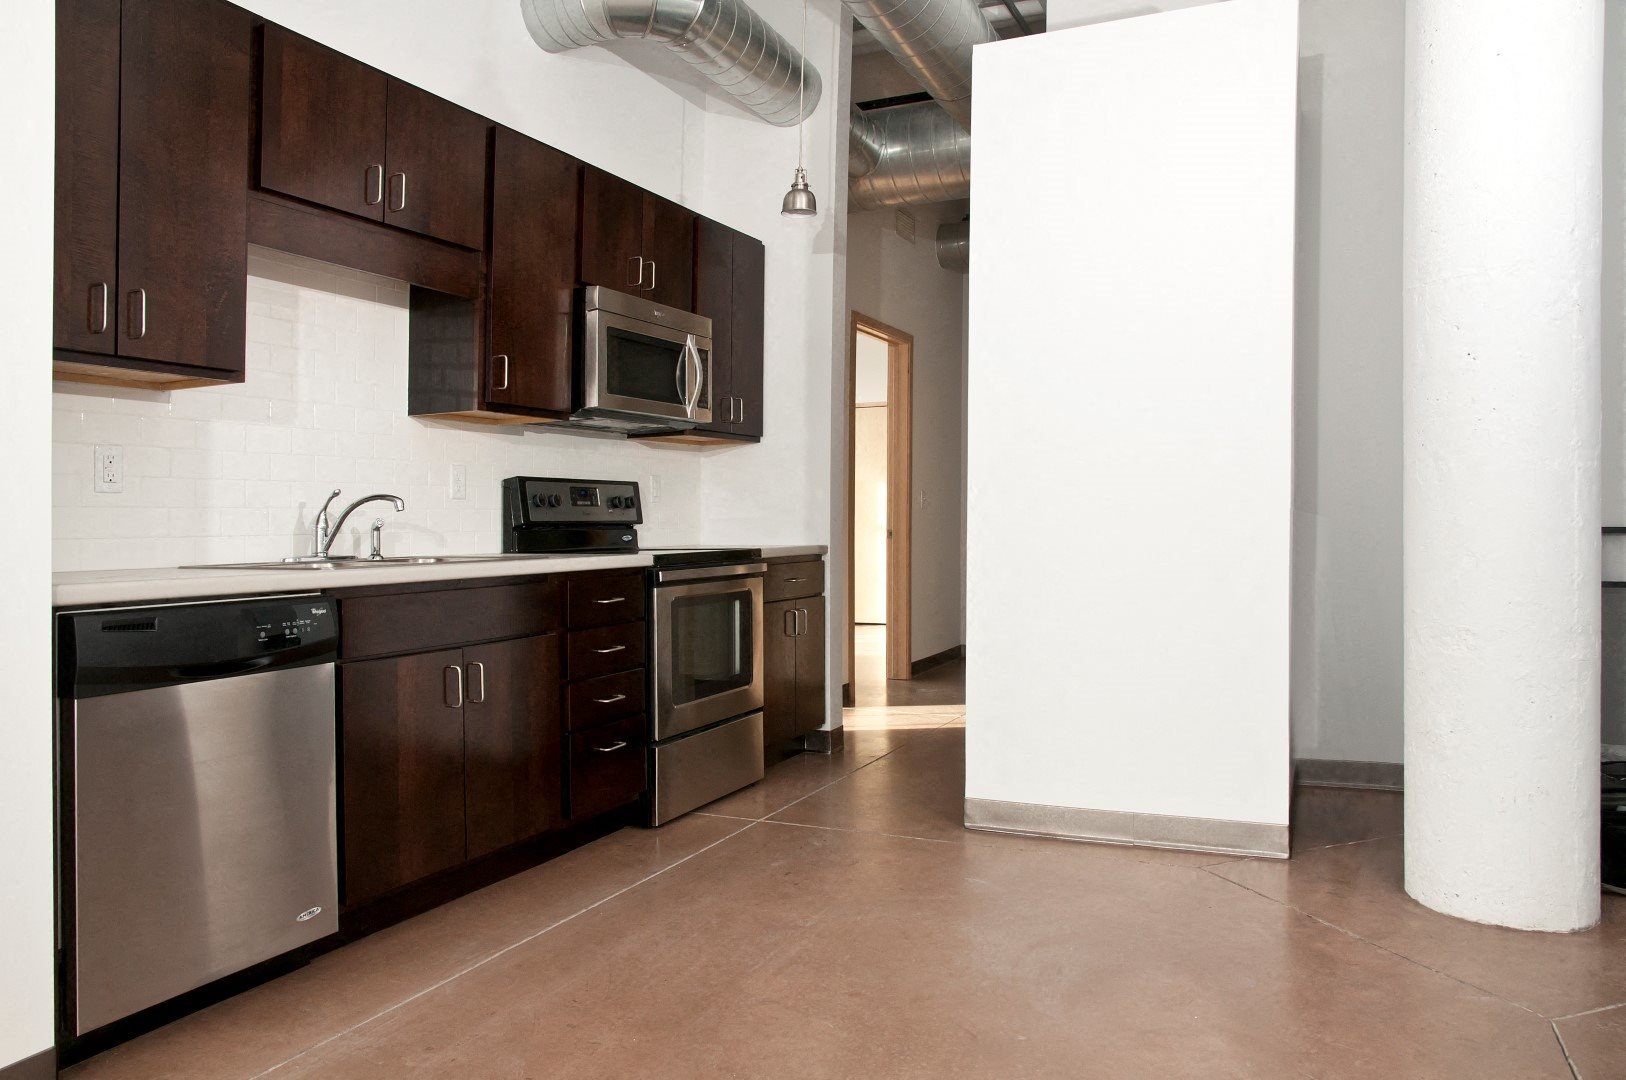 Gurley Lofts Vacant Model Kitchen